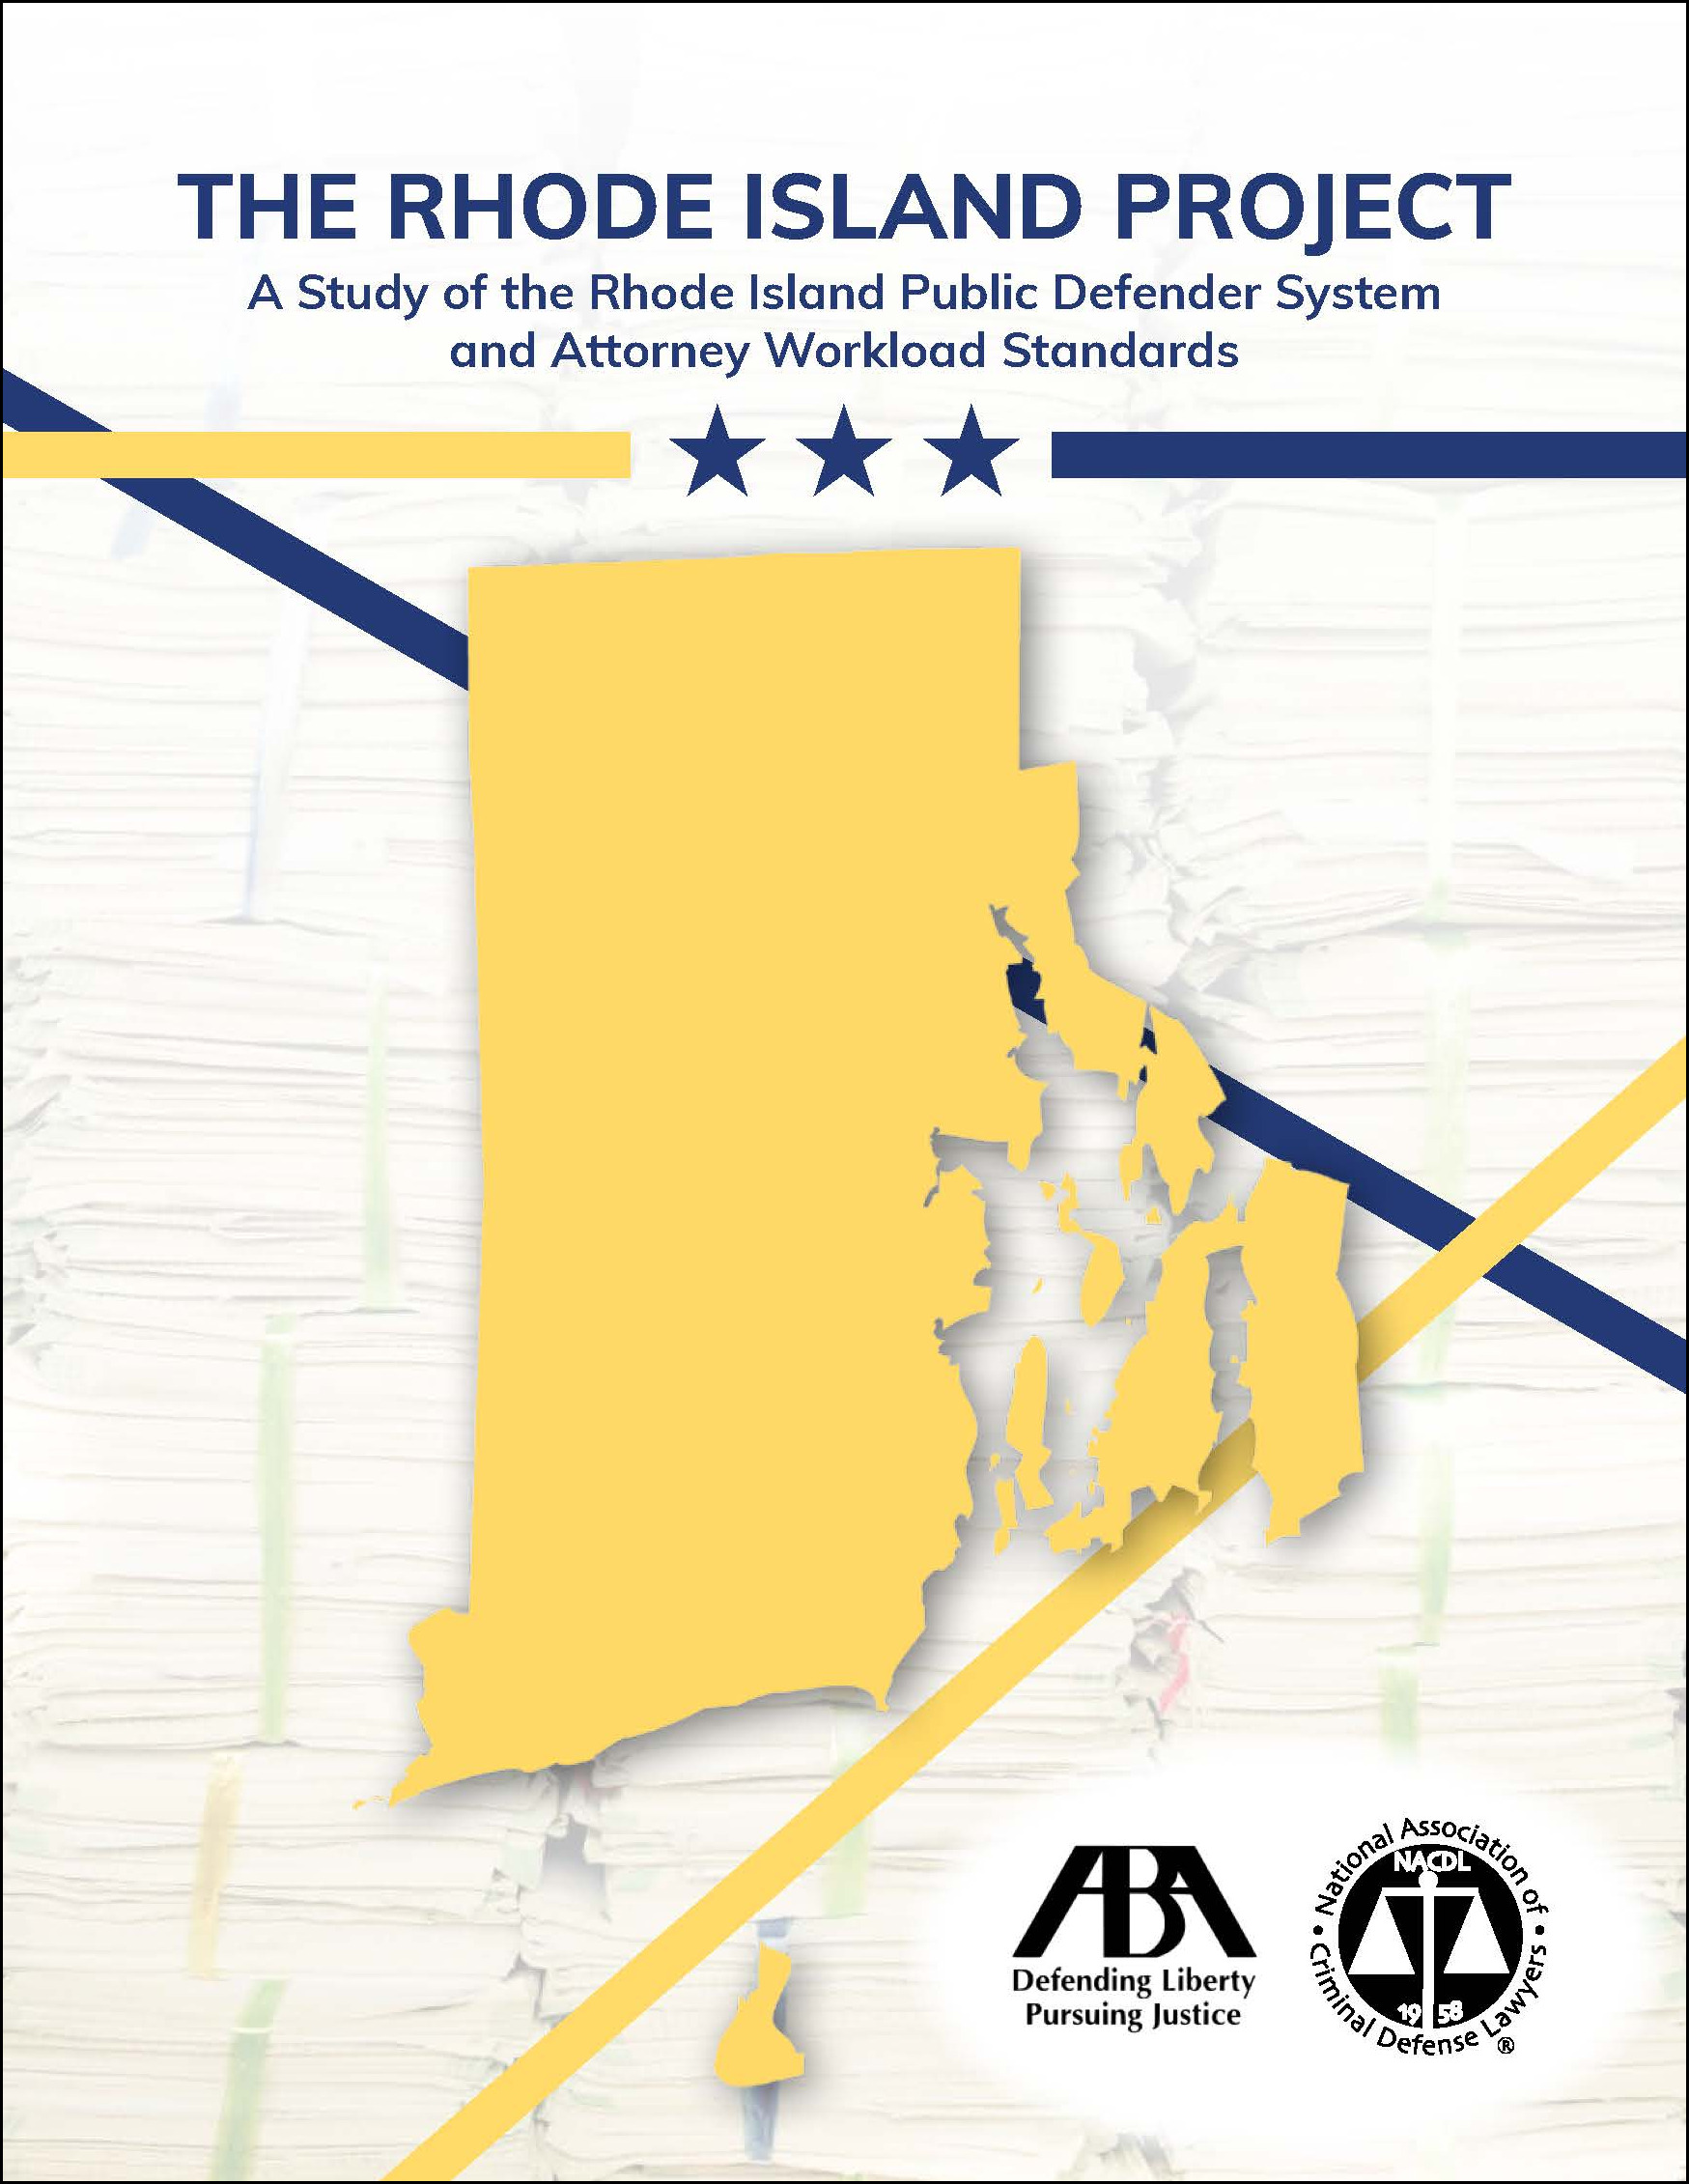 The Rhode Island Project: A Study of the Rhode Island Public Defender System Cover